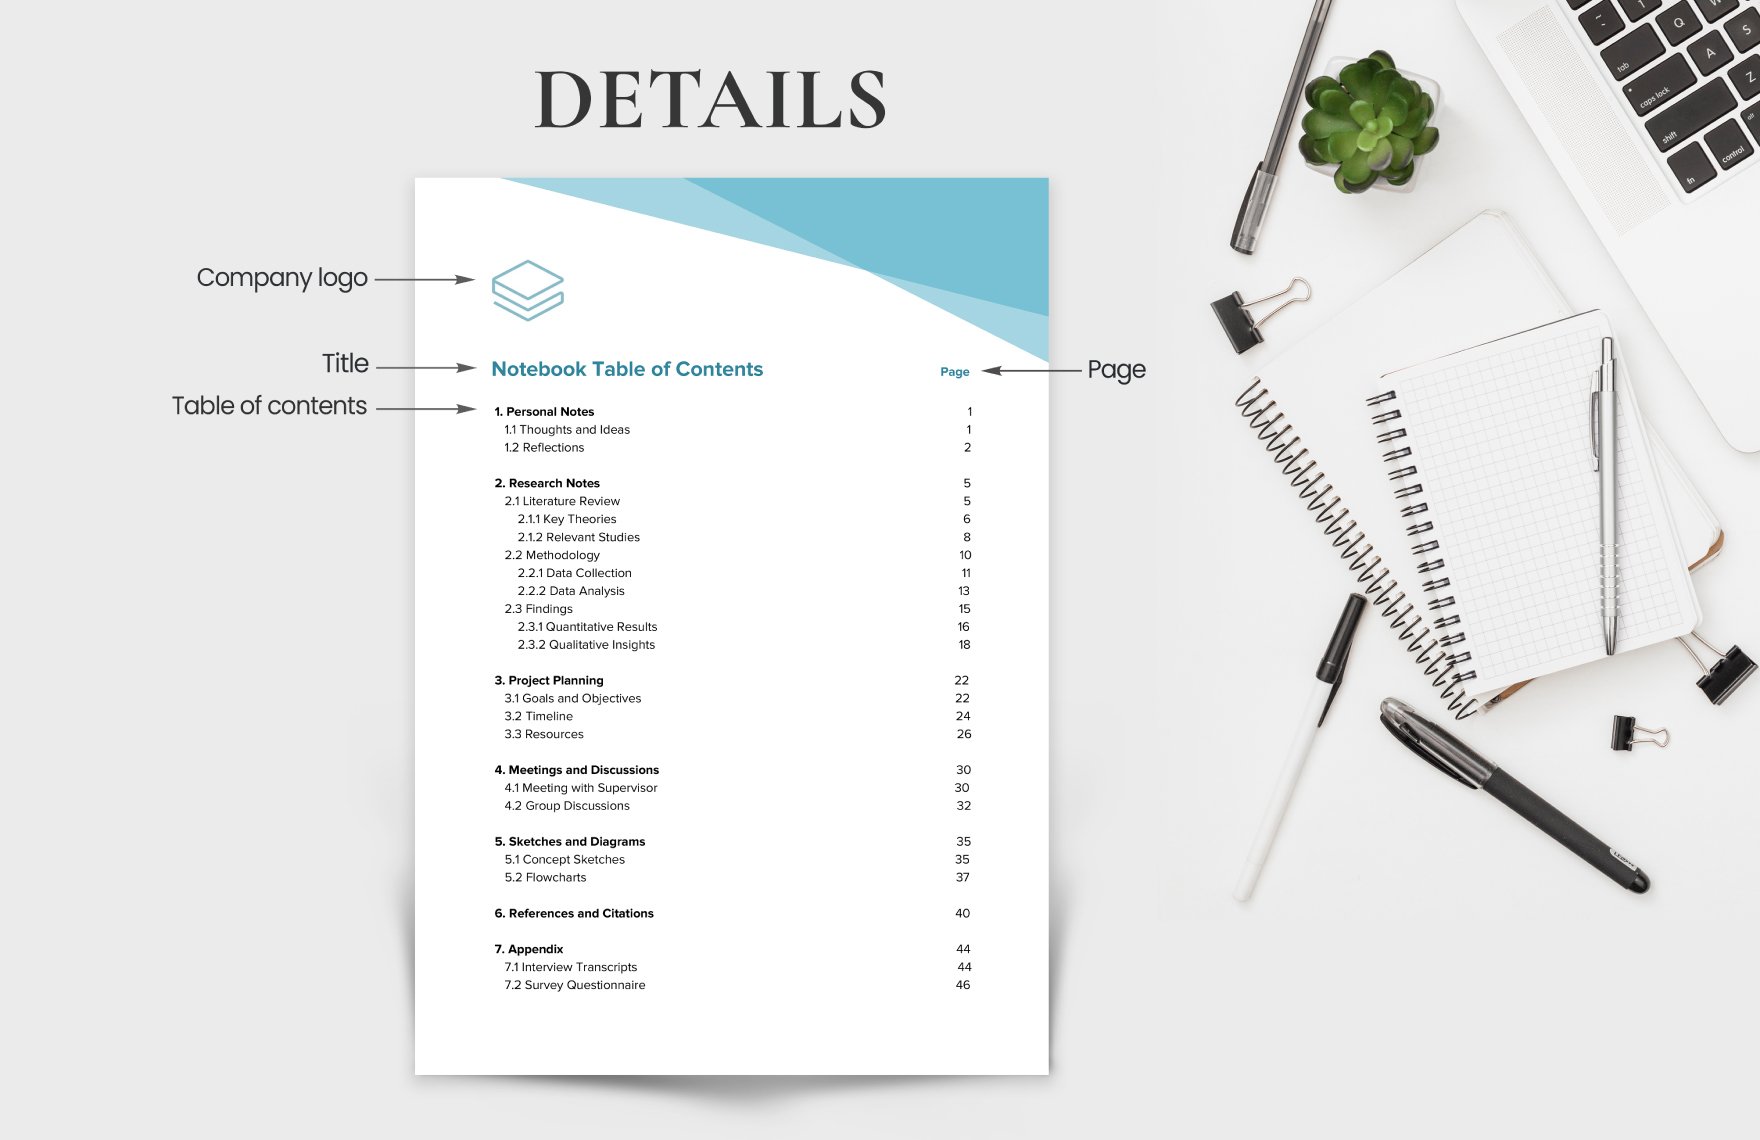 Notebook Table of Contents Template